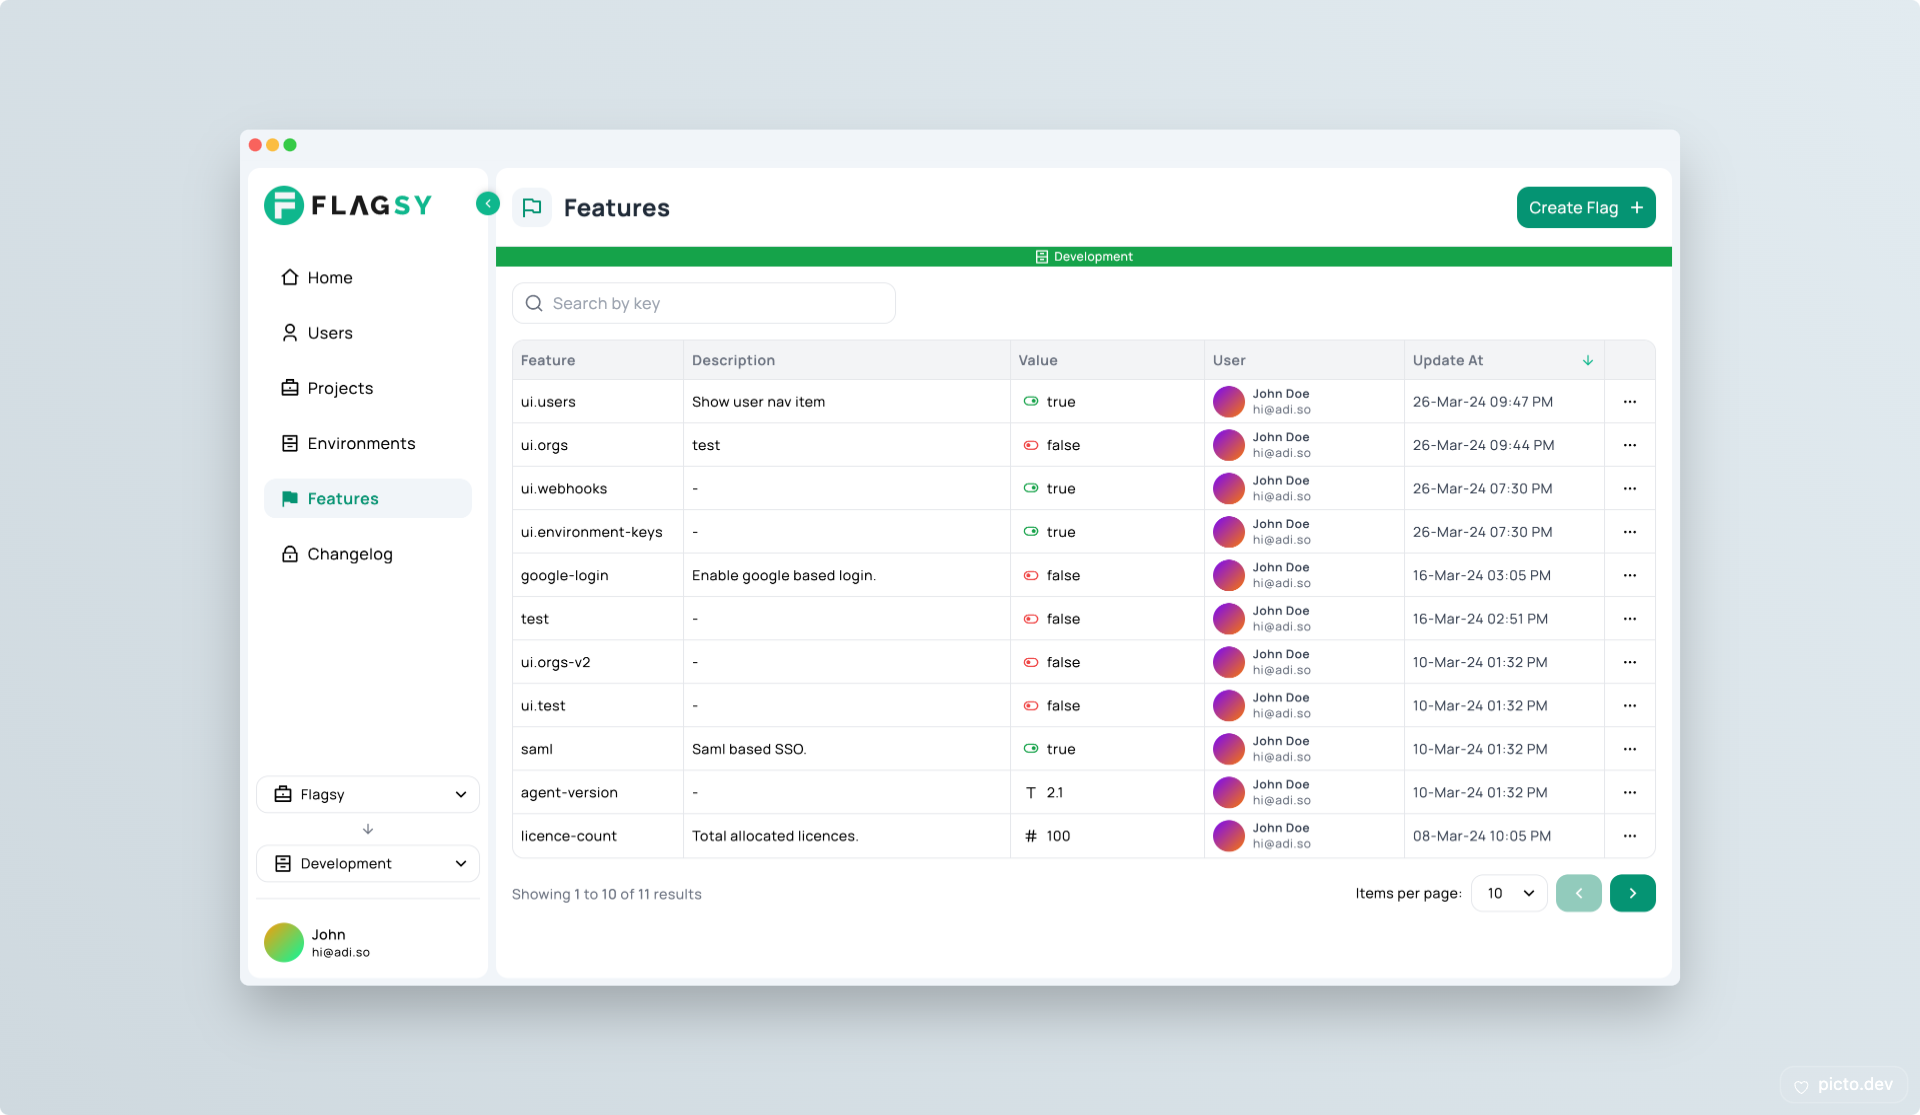 Flagsy features page